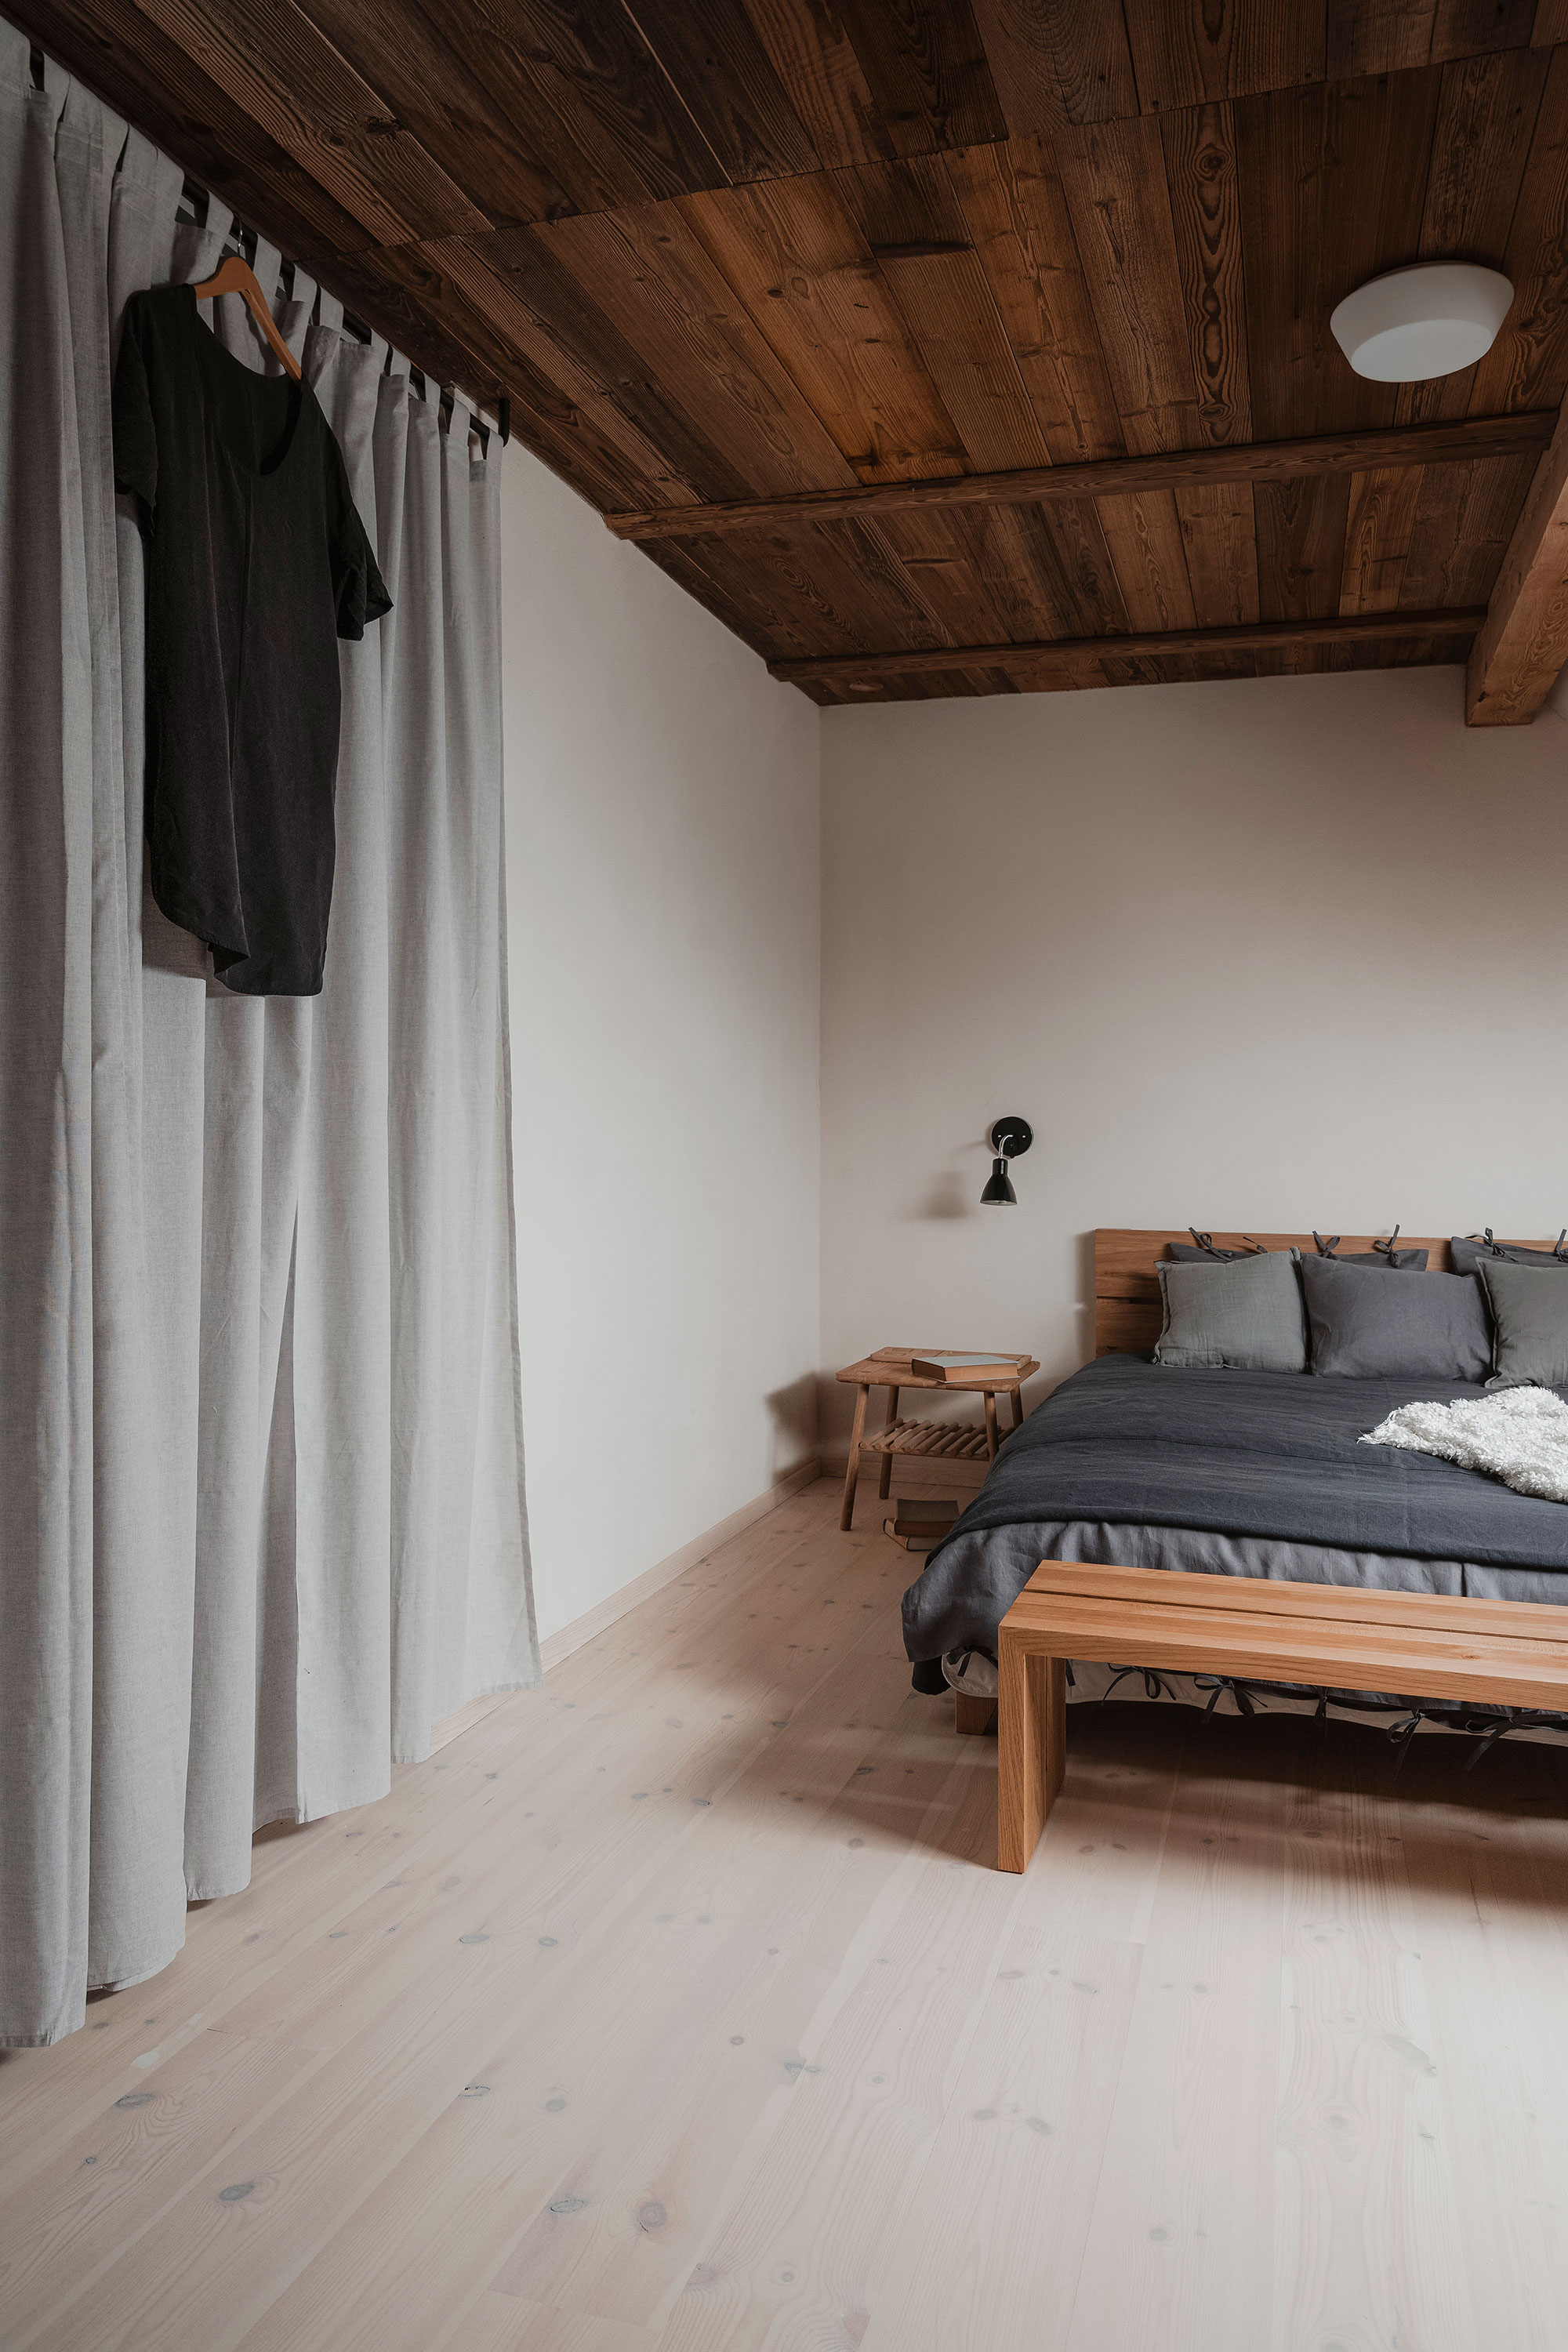 Countryside Guesthouse - Gessato